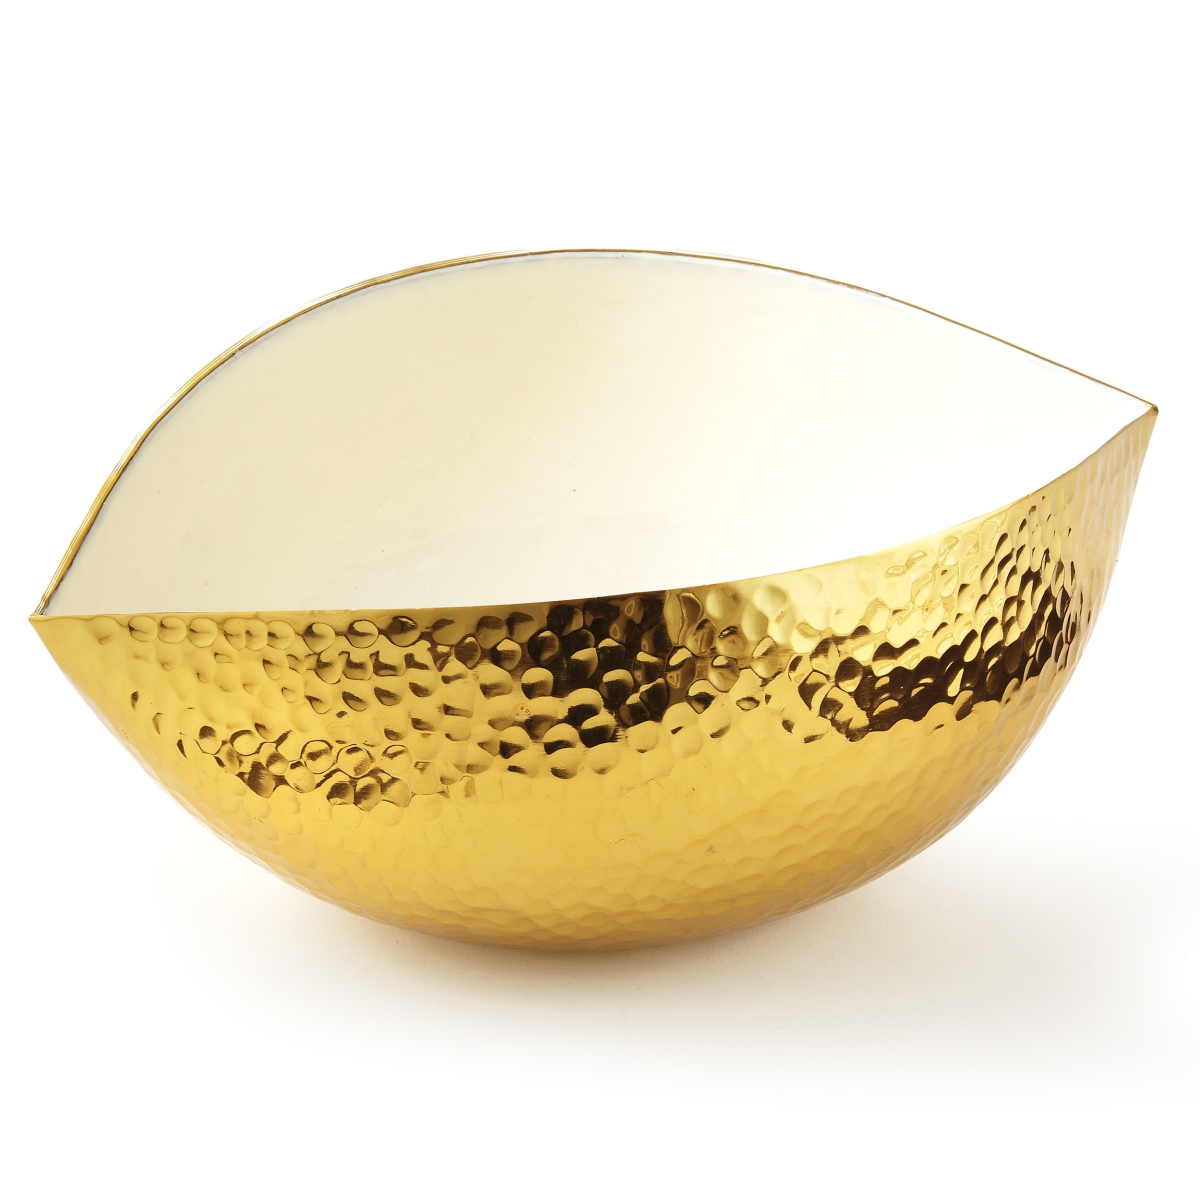 70183 10 X 6.5 X 4.25 In. Bethany Bowl, Gold & White